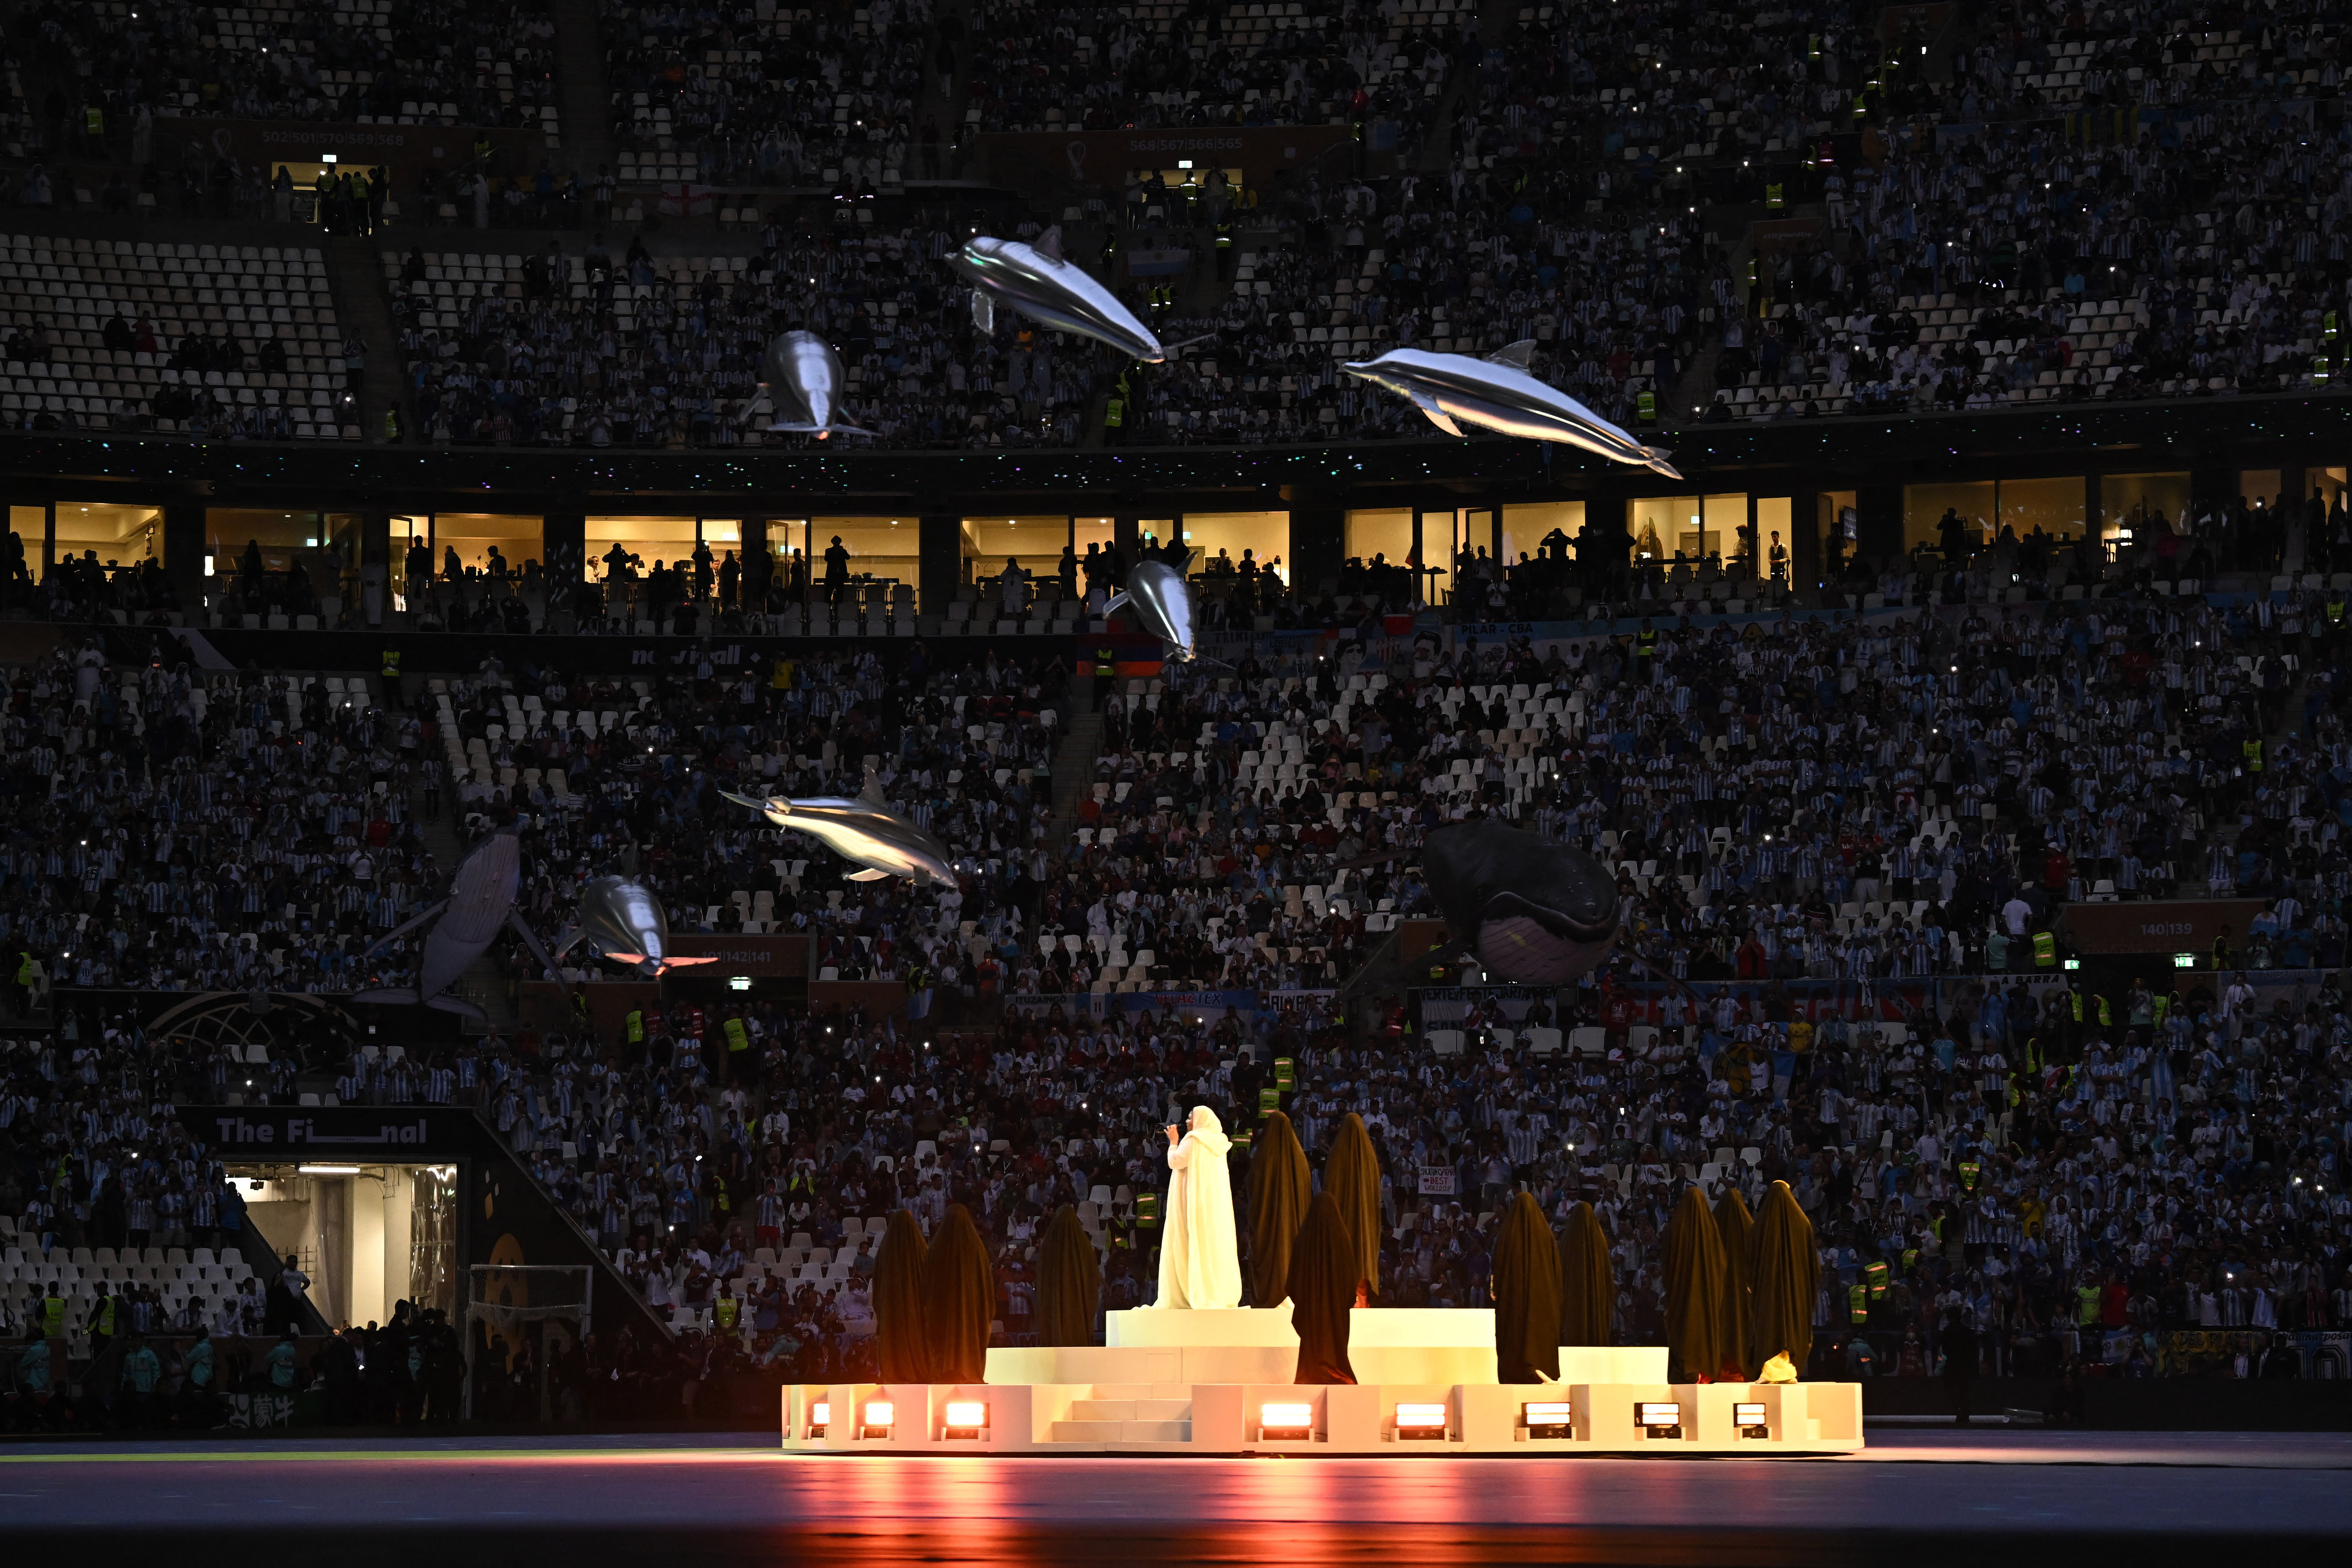 Soccer Football - FIFA World Cup Qatar 2022 - Final - Argentina v France - Lusail Stadium, Lusail, Qatar - December 18, 2022  A woman performs during the closing ceremony before the match REUTERS/Dylan Martinez